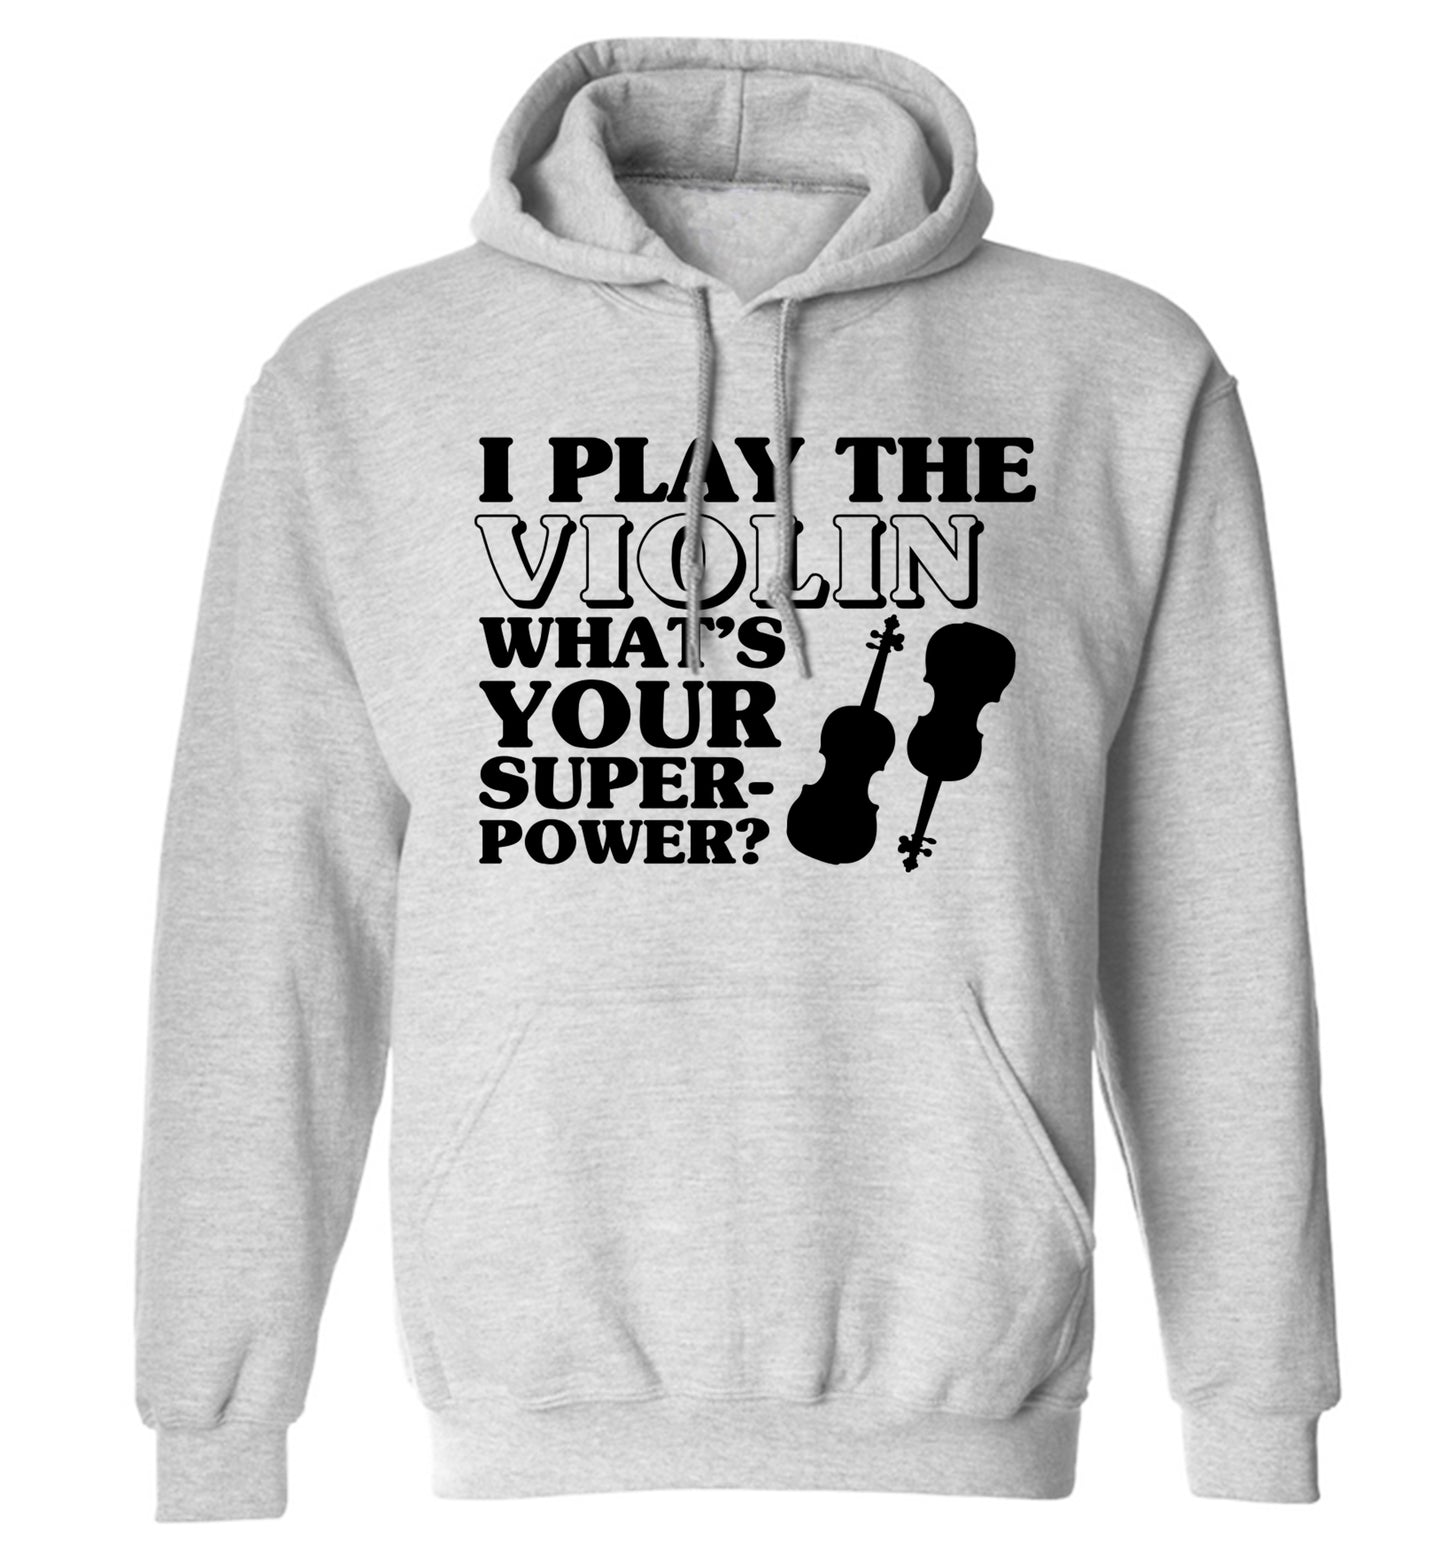 I Play Violin What's Your Superpower? adults unisex grey hoodie 2XL